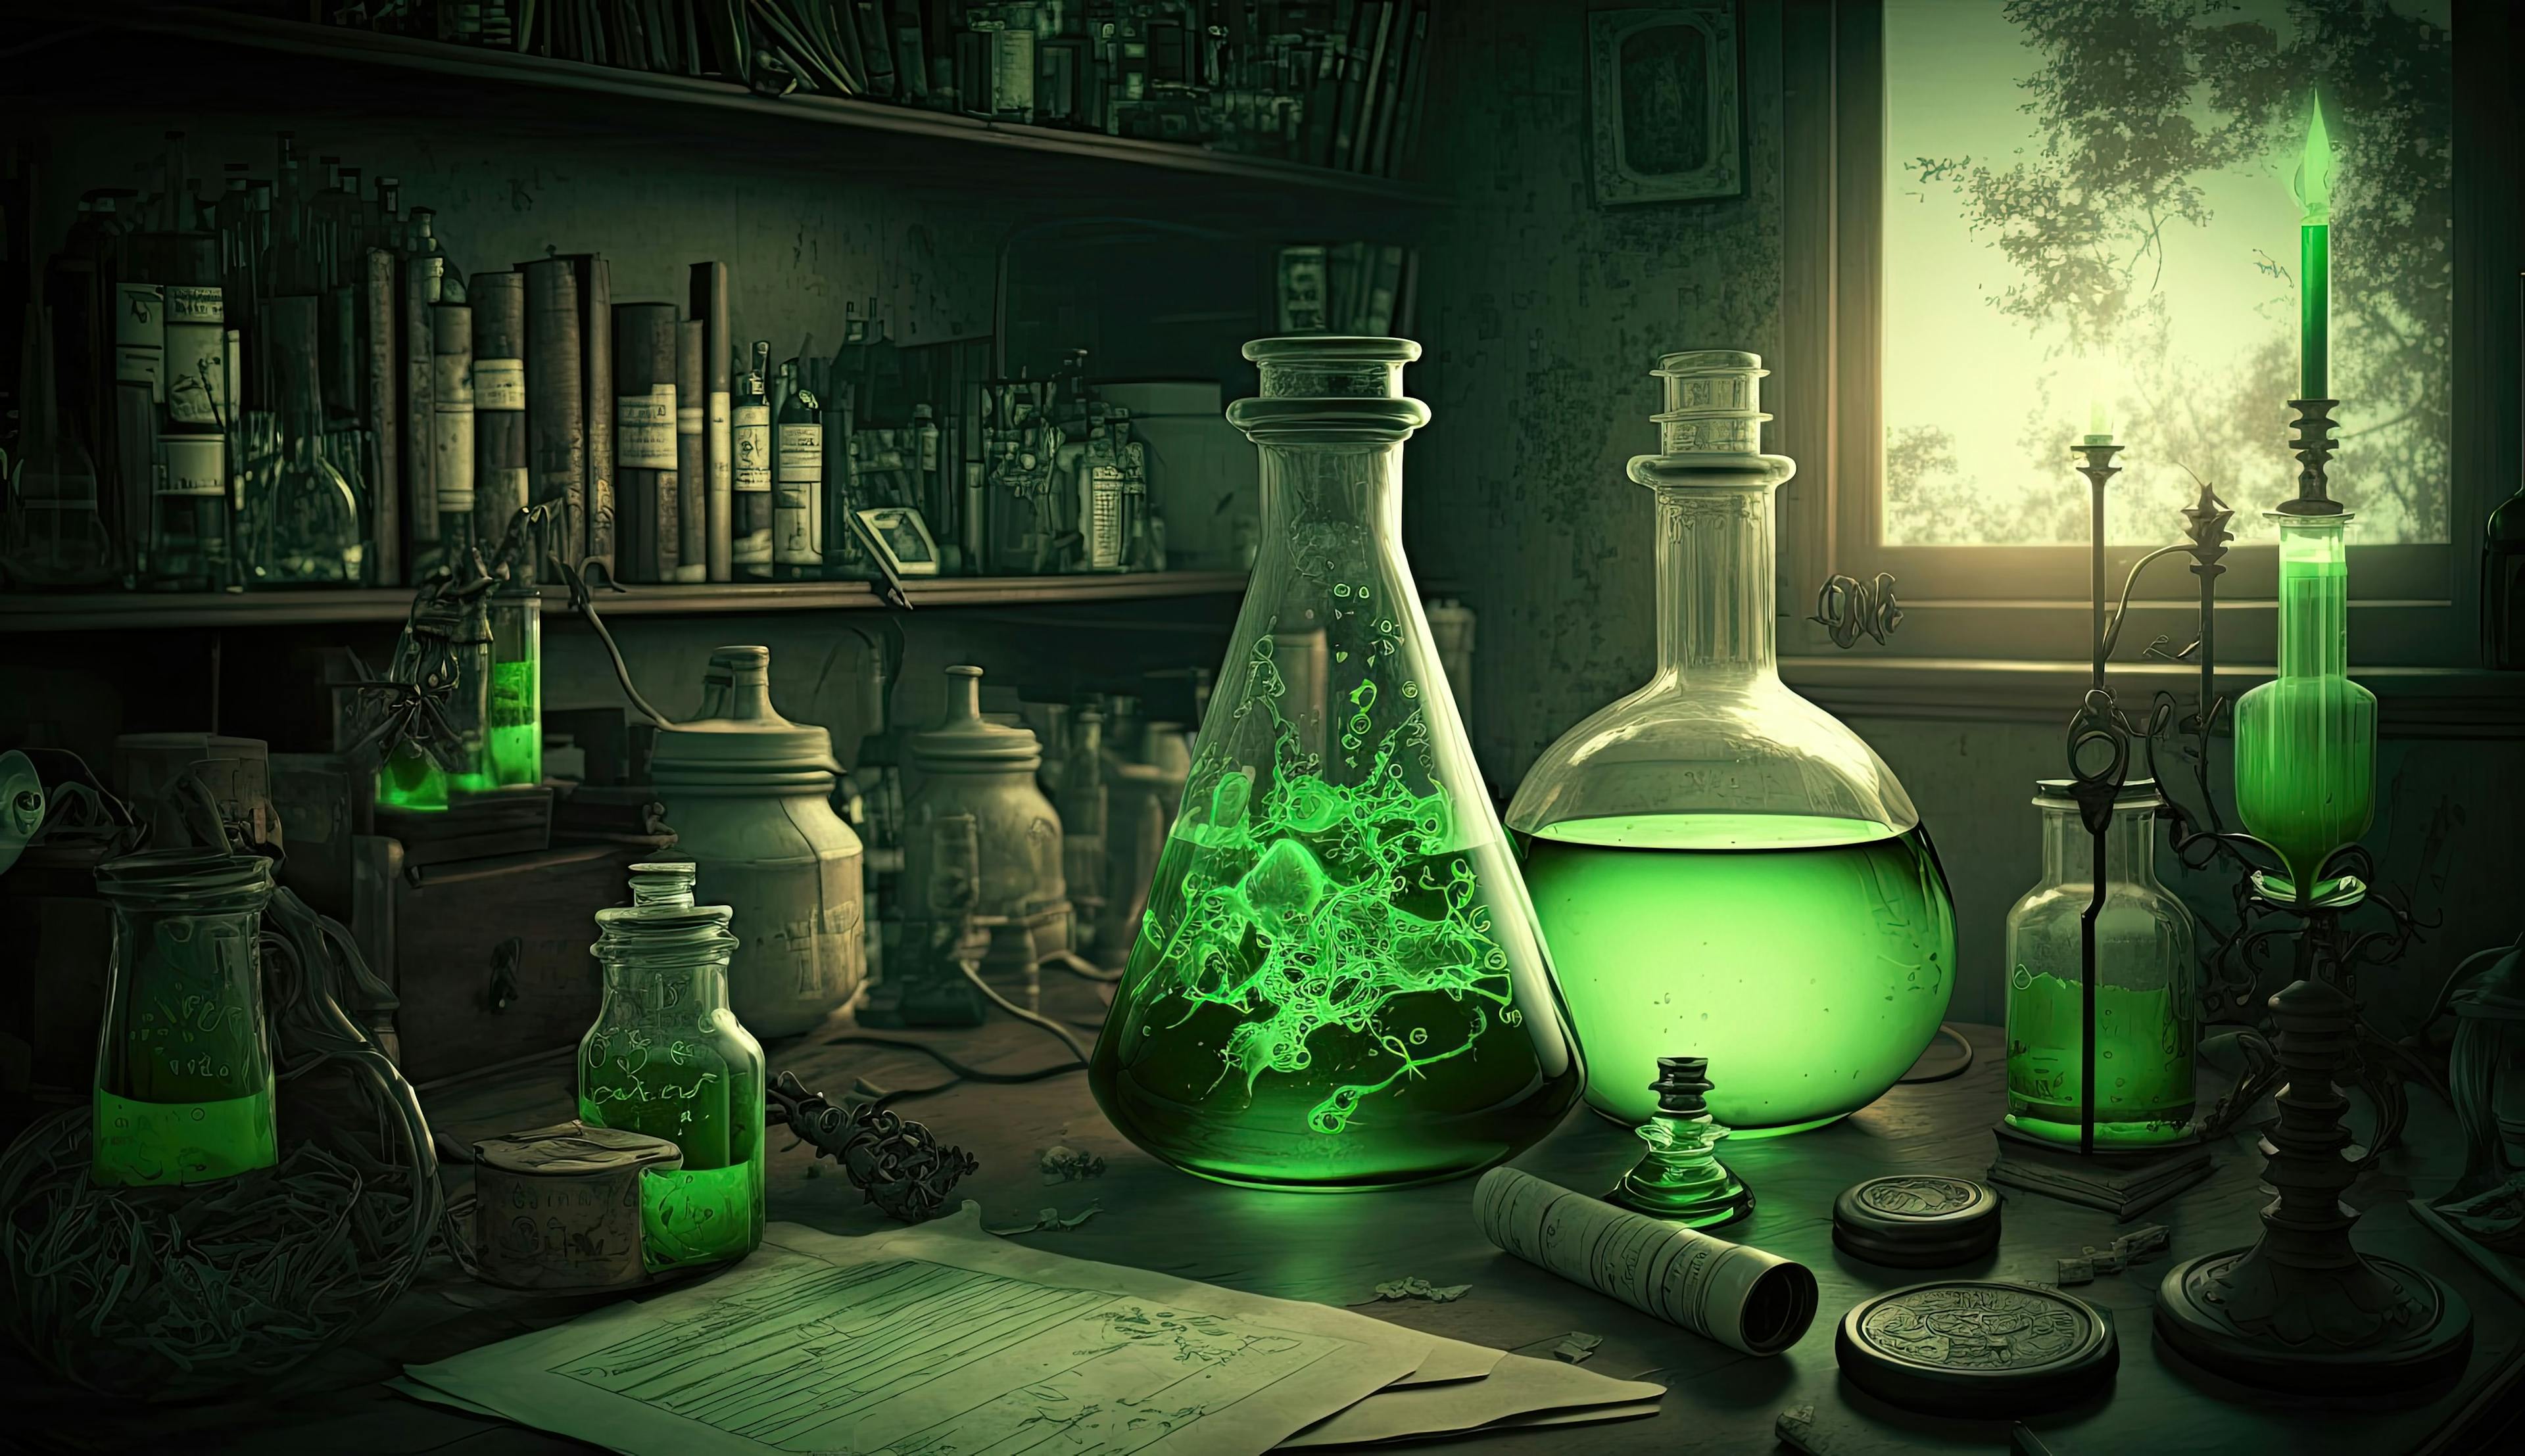 A modern green chemistry laboratory setting promotes sustainable and eco-friendly practices. Generated by AI. | Image Credit: © Anastasia - stock.adobe.com.